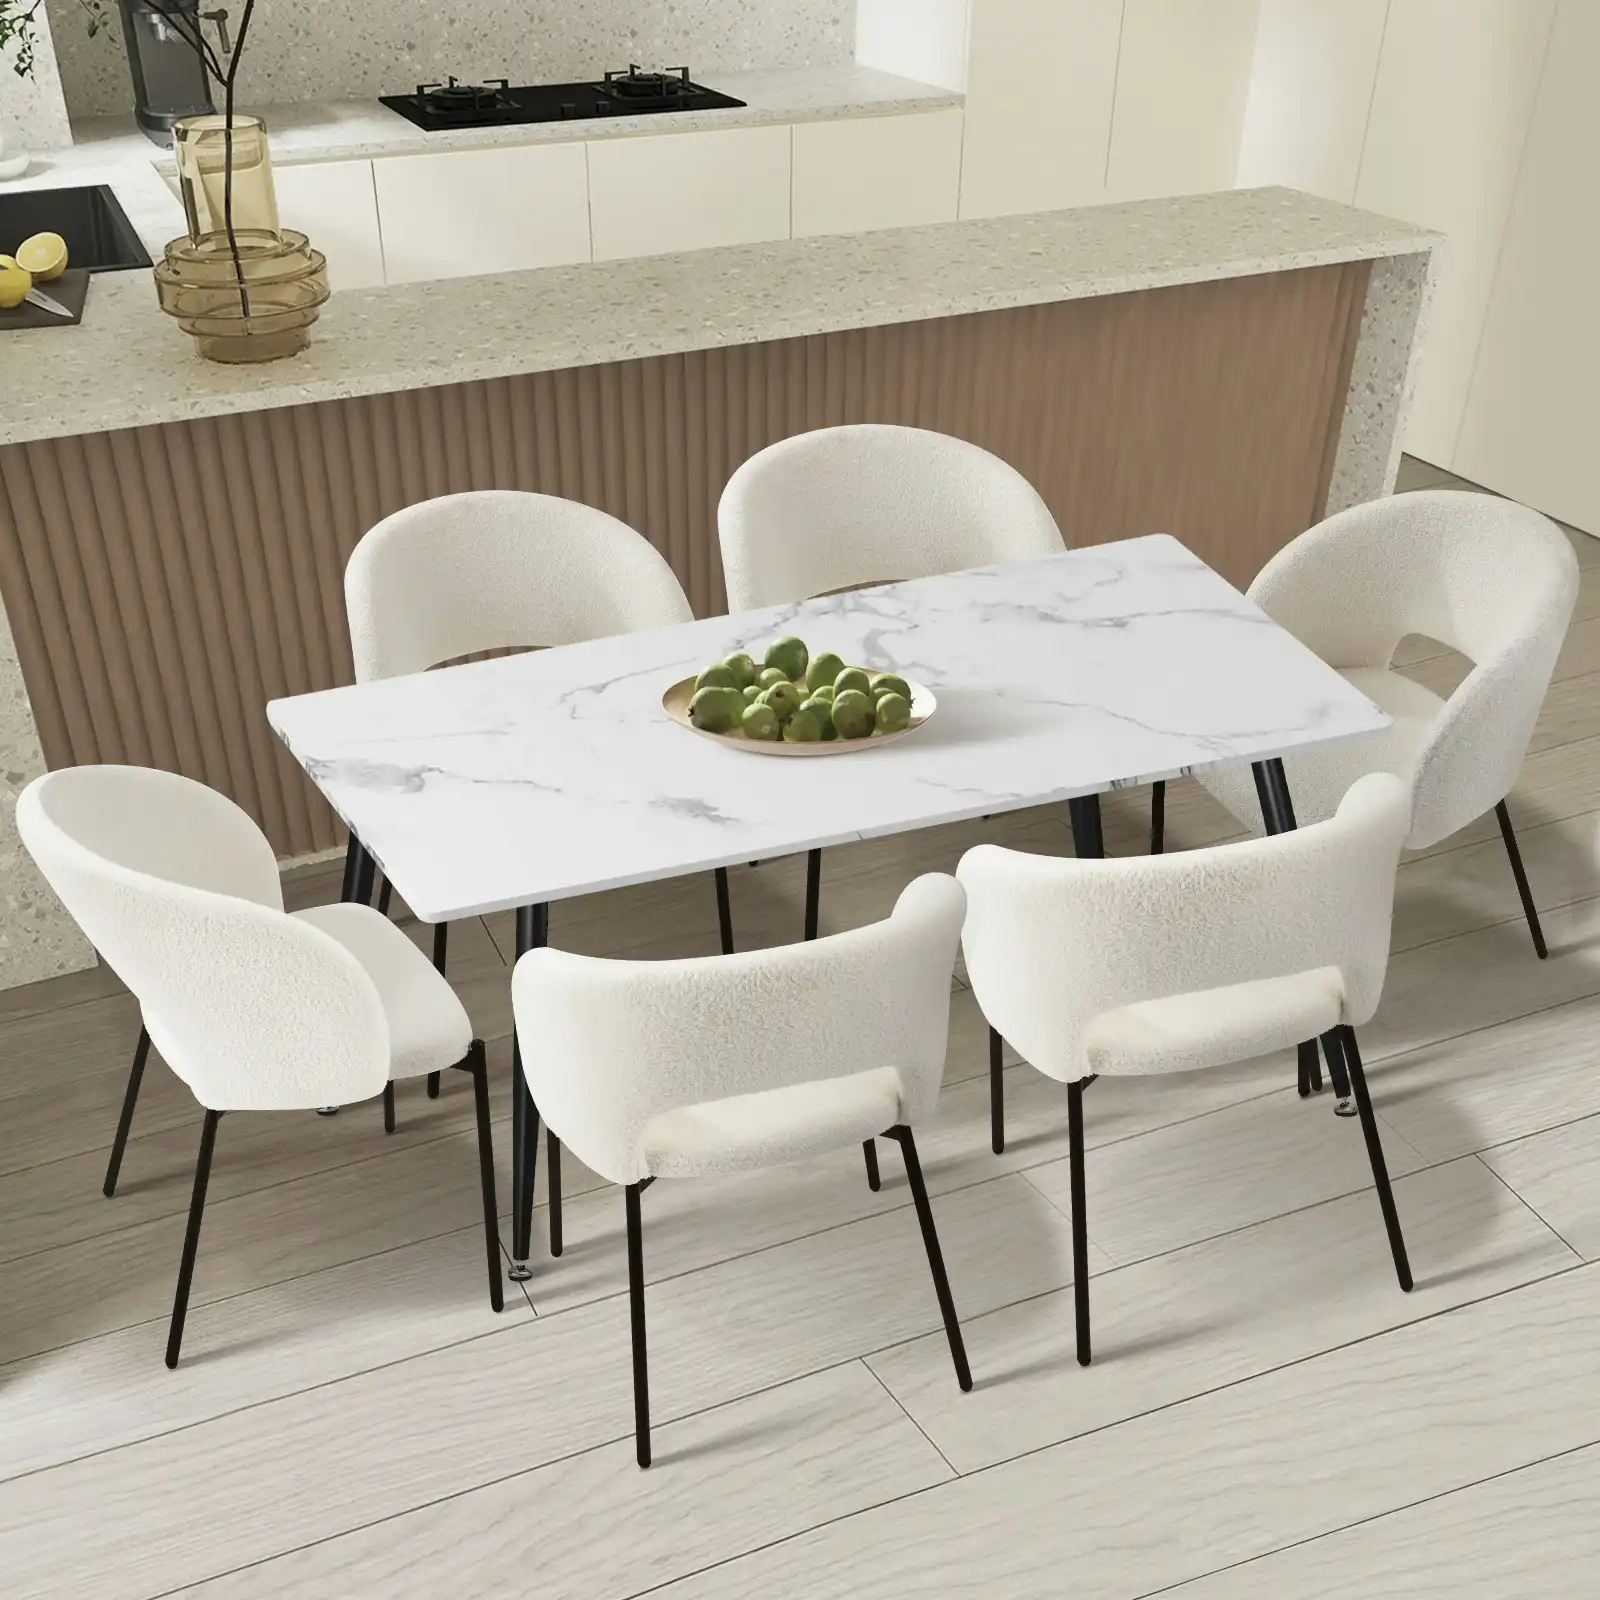 Oikiture 7PCS Dining sets 120cm Rectangle Table with 6PCS Chairs Sherpa White